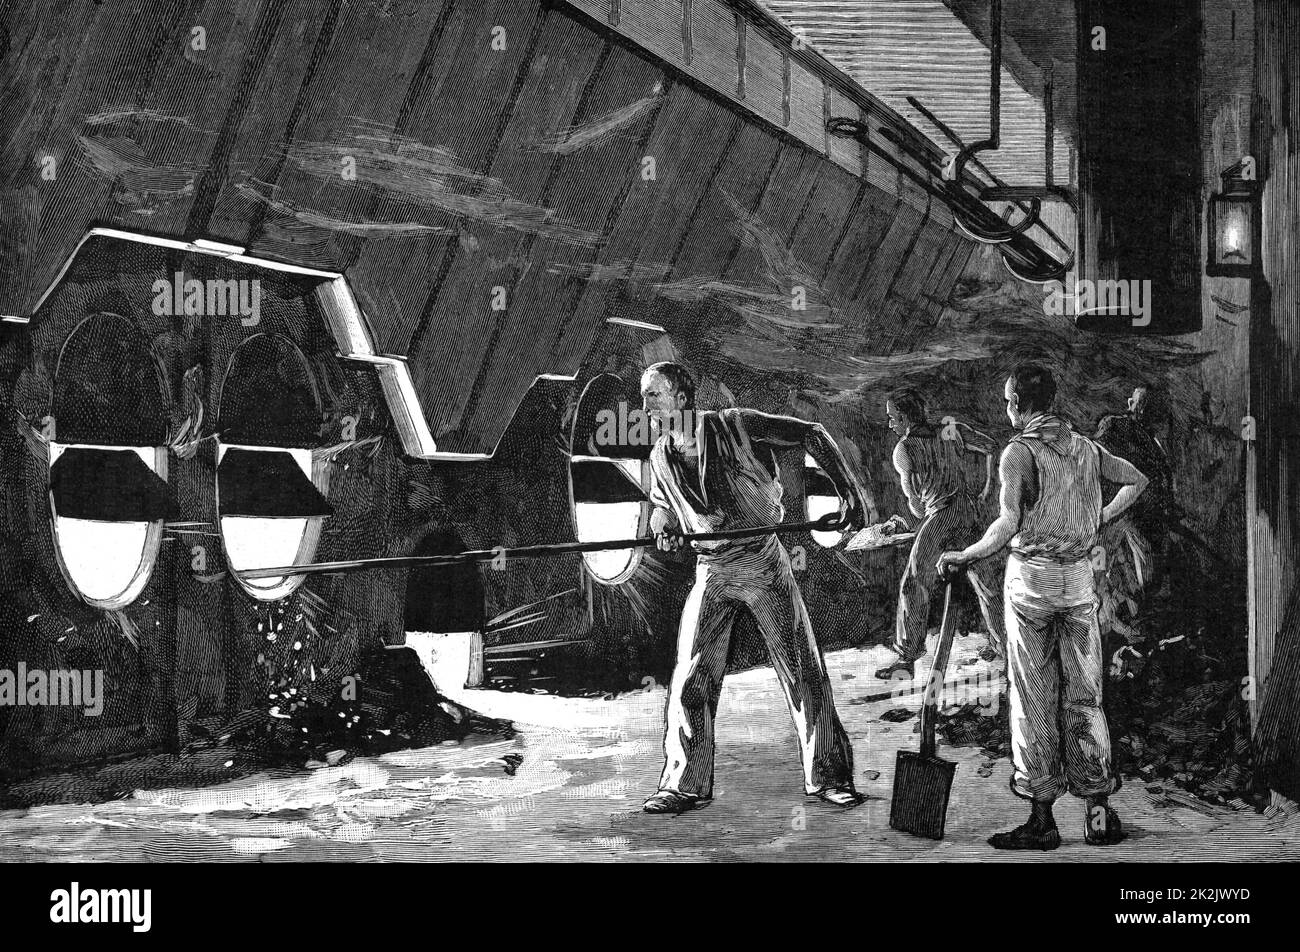 Stokers at work in the heat of the boiler room of a transatlantic liner. The man in the foreground is raking out clinker from the fire box while the man further along the row of is shovelling in more coal. From 'La Science Illustree' (Paris, 1892). Engraving. Transport. Shipping. Power. Steam. Fuel. Coal. Stock Photo